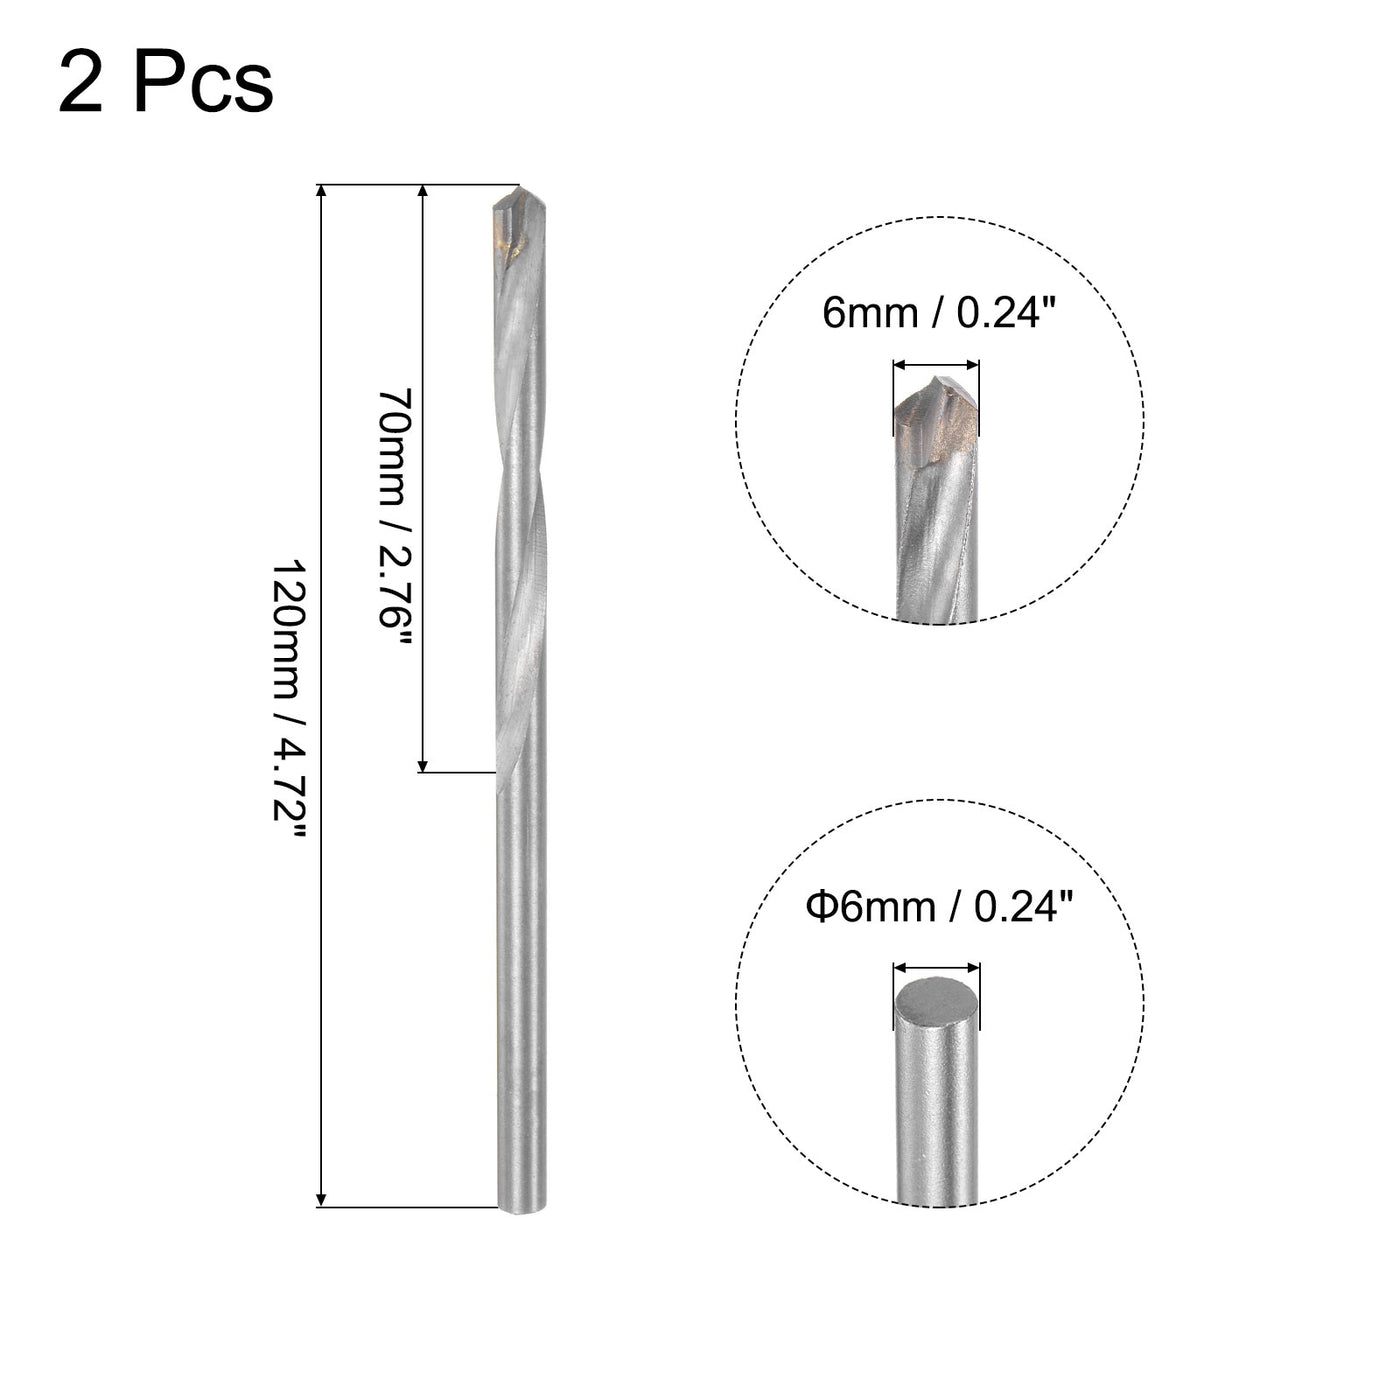 uxcell Uxcell 6mm Cutting Dia Round Shank Cemented Carbide Twist Drill Bit, 120mm Length 2 Pcs